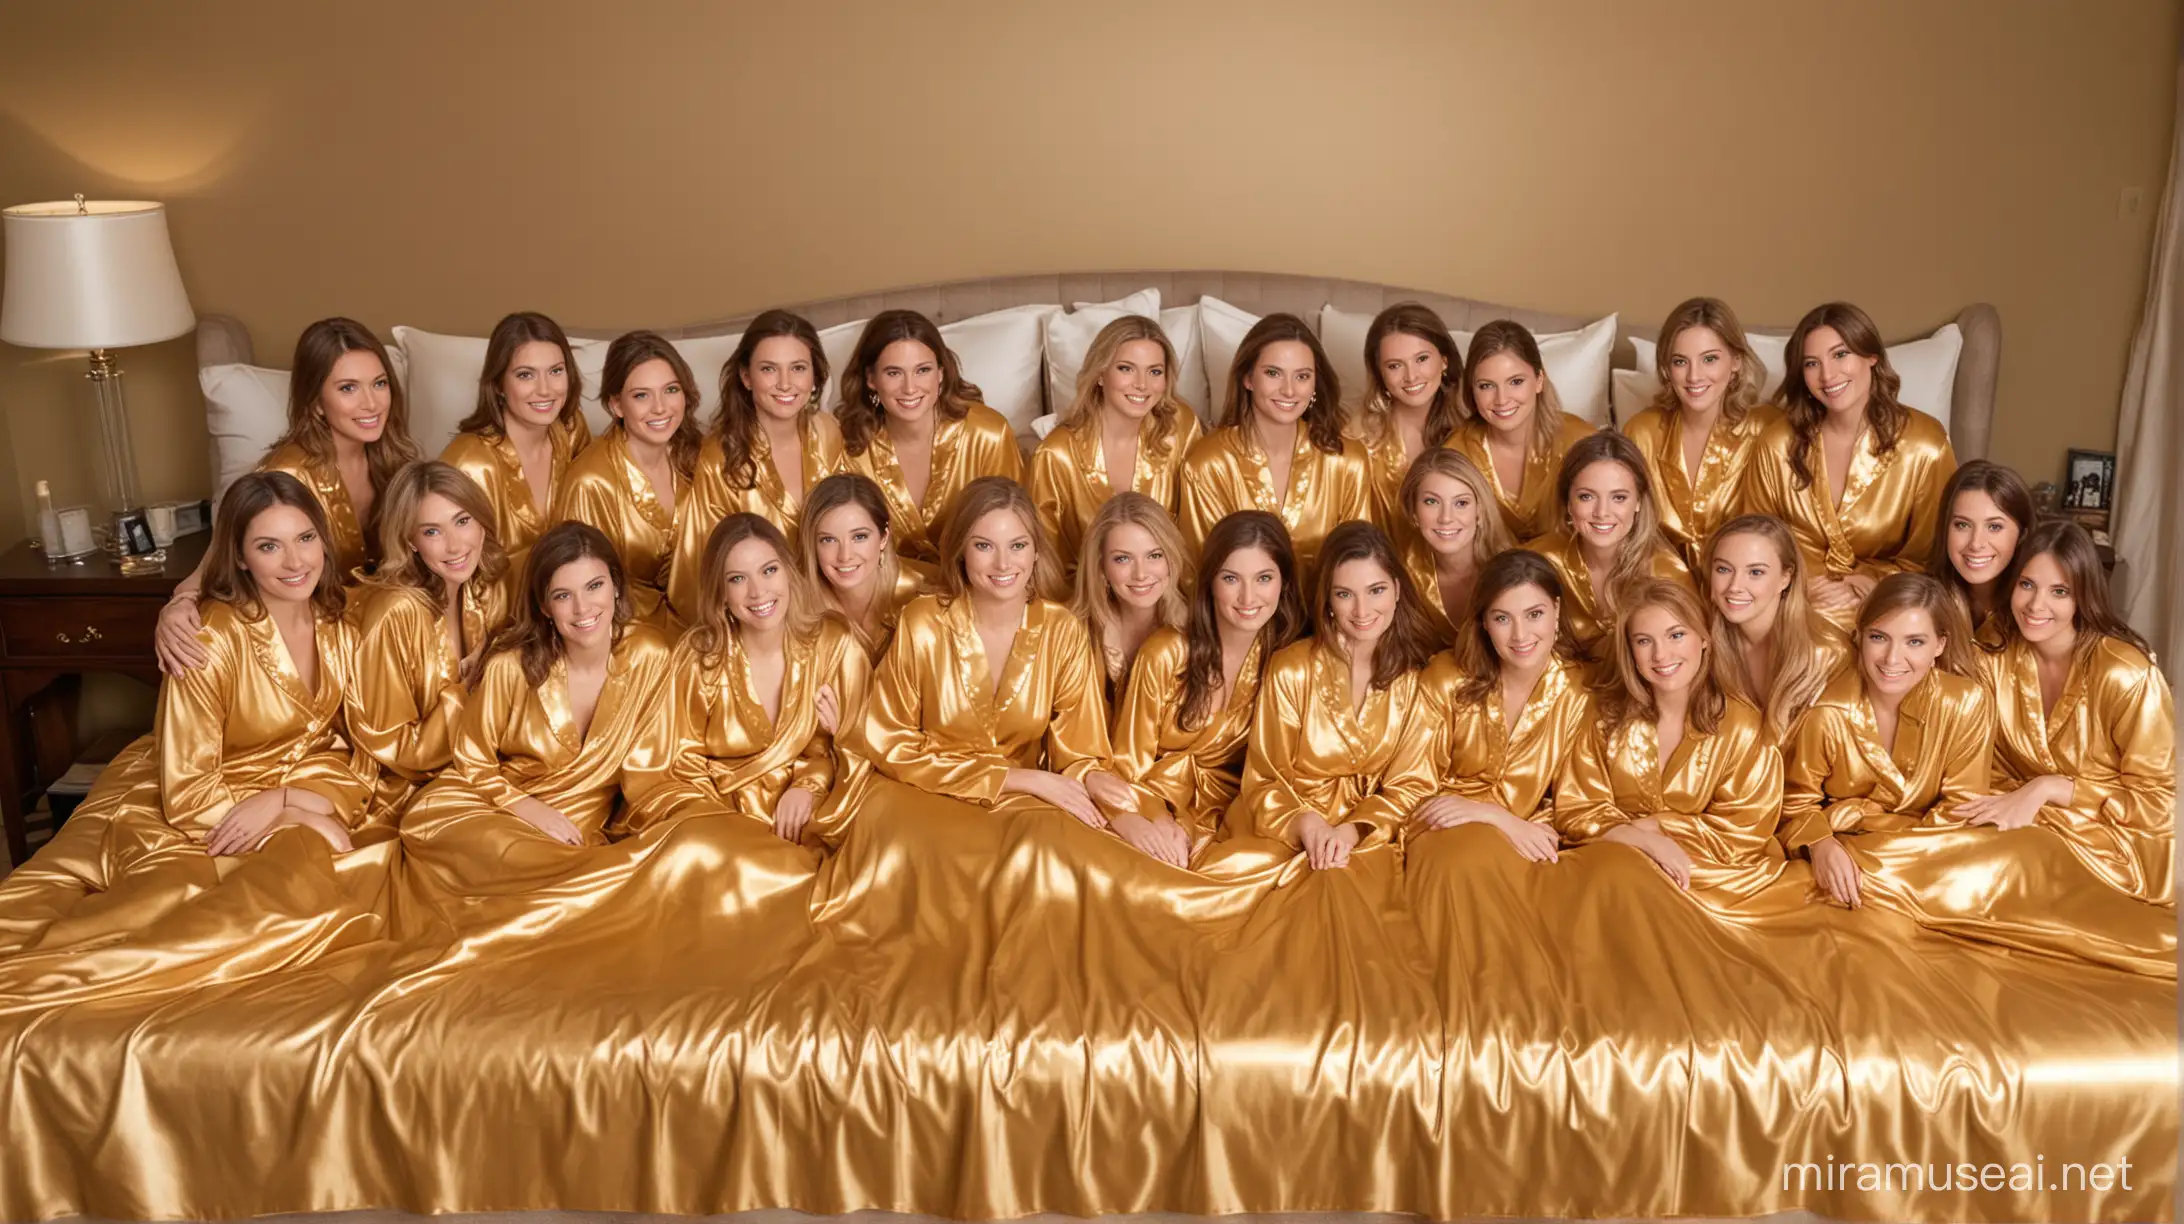 20 women in gold satin nightgowns on satin beds